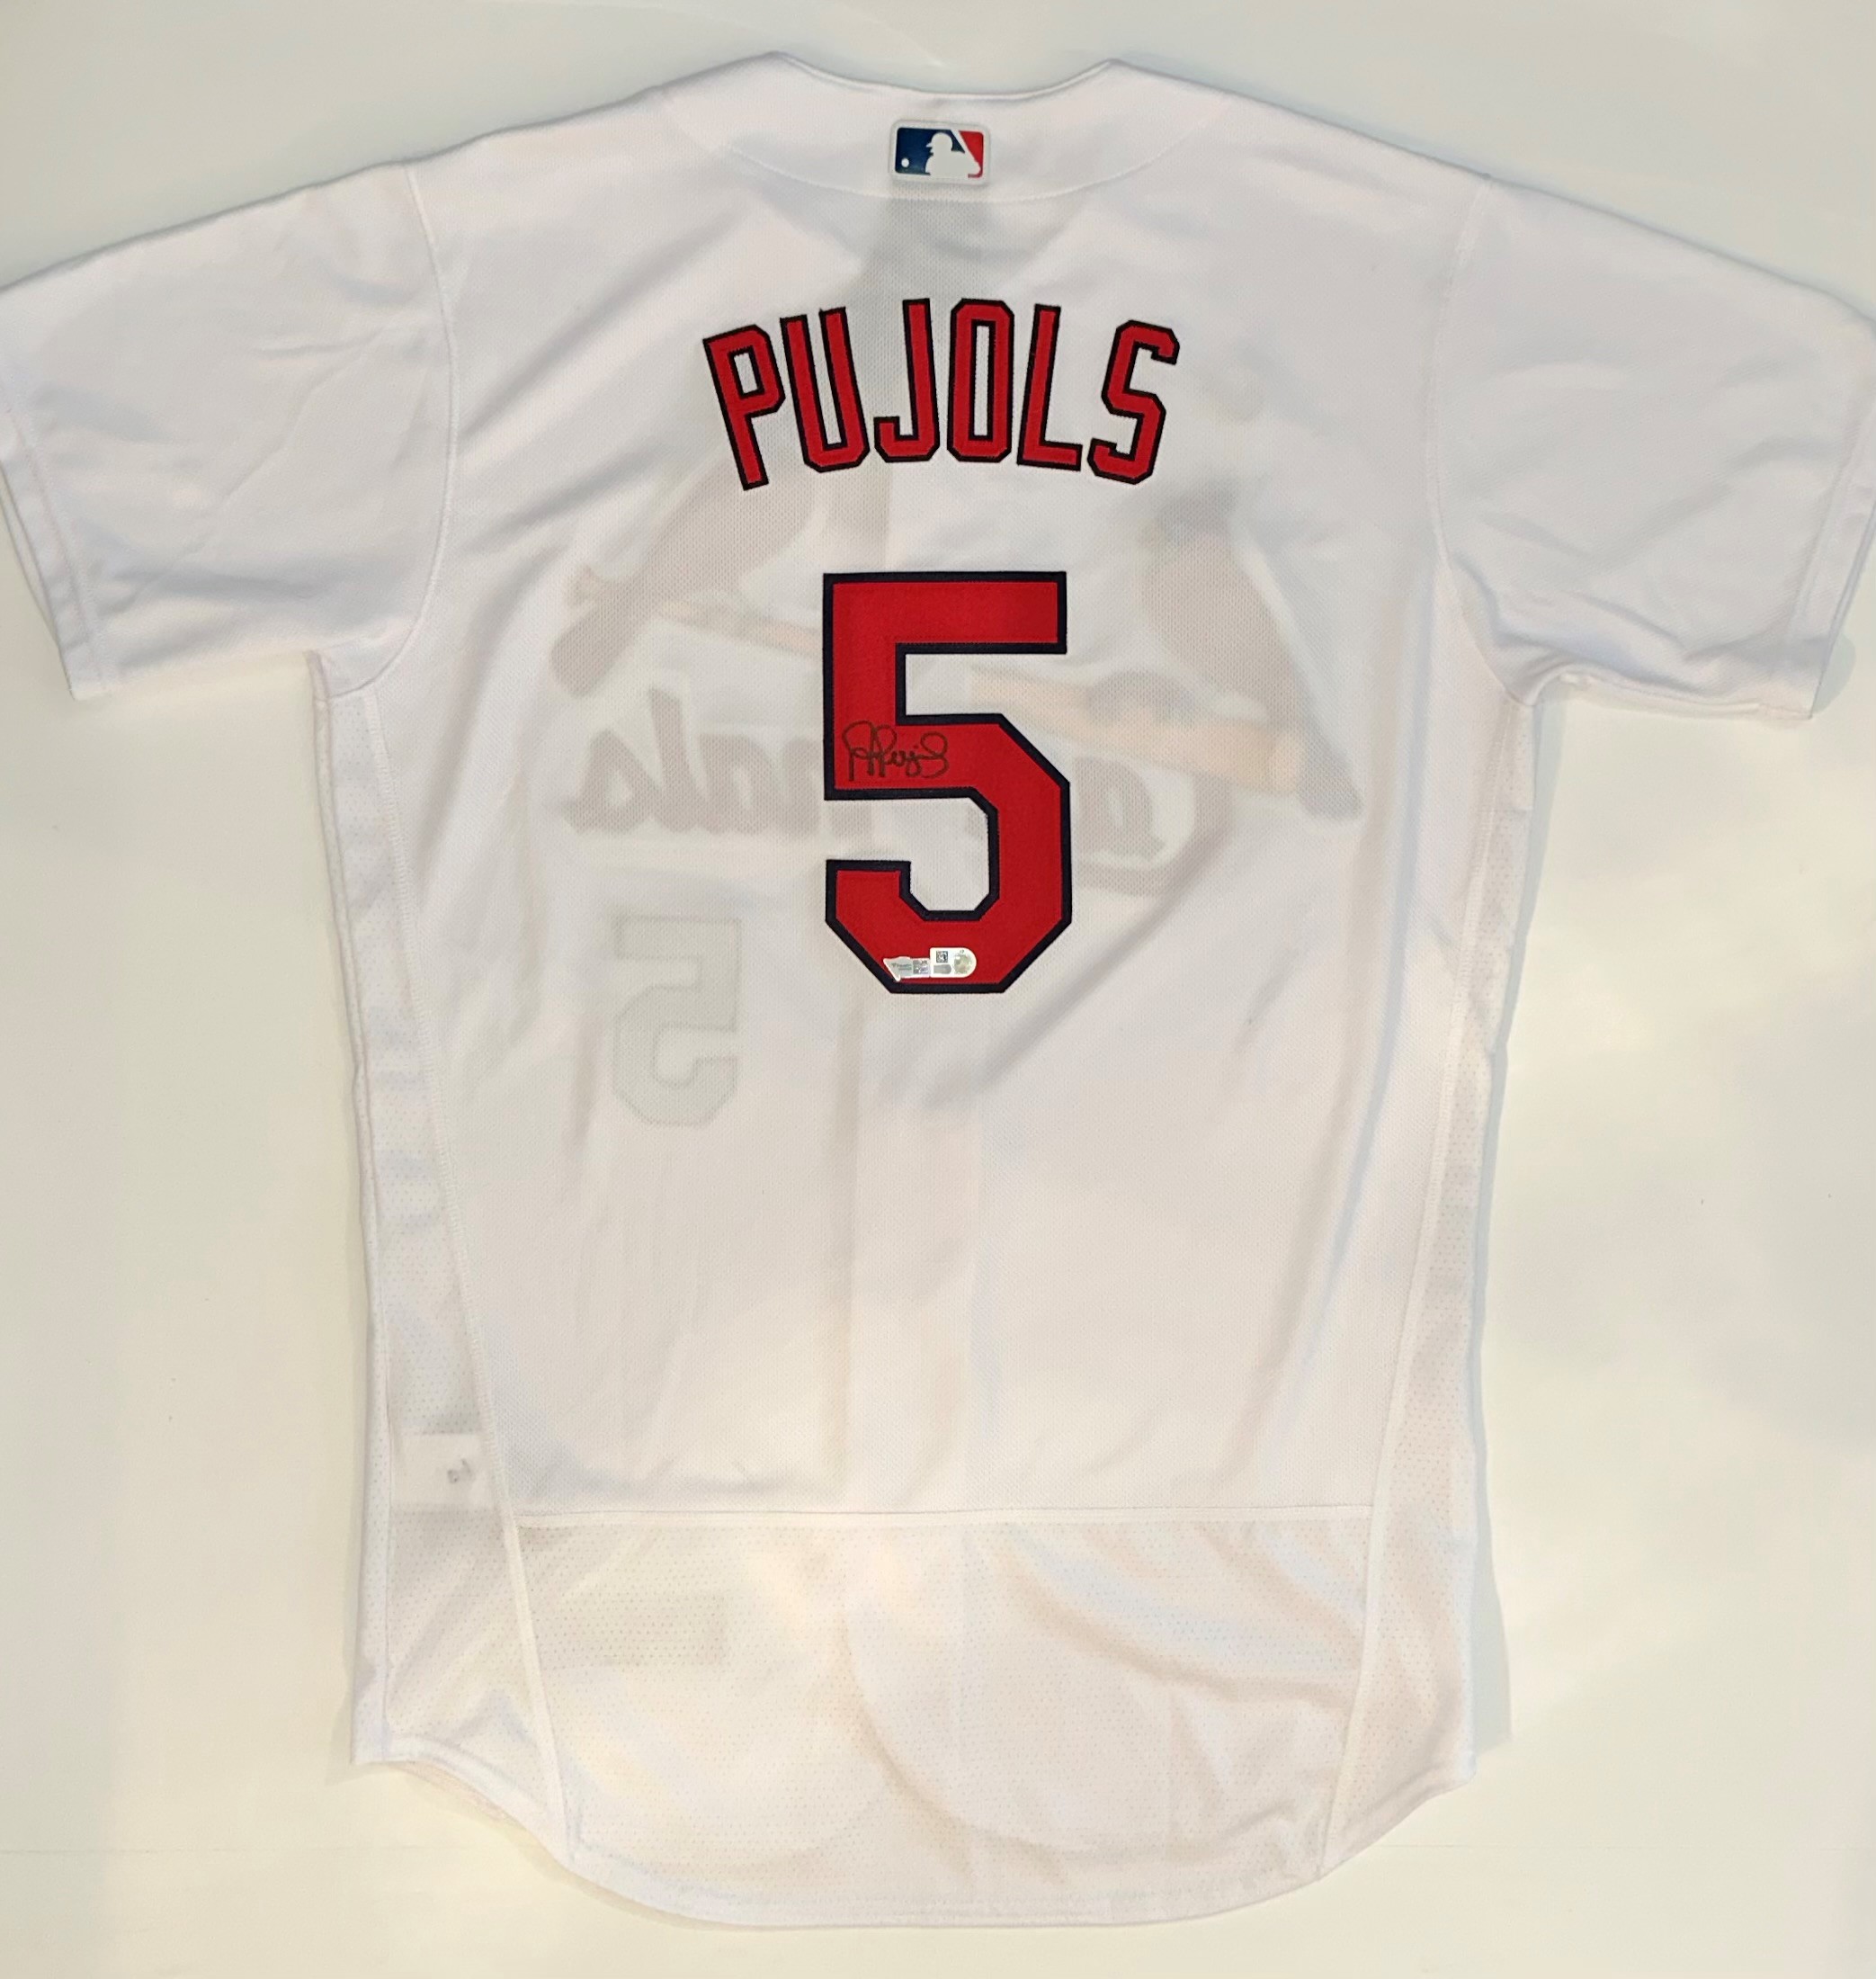 Albert Pujols Autographed Cardinals Authentic Jersey - The